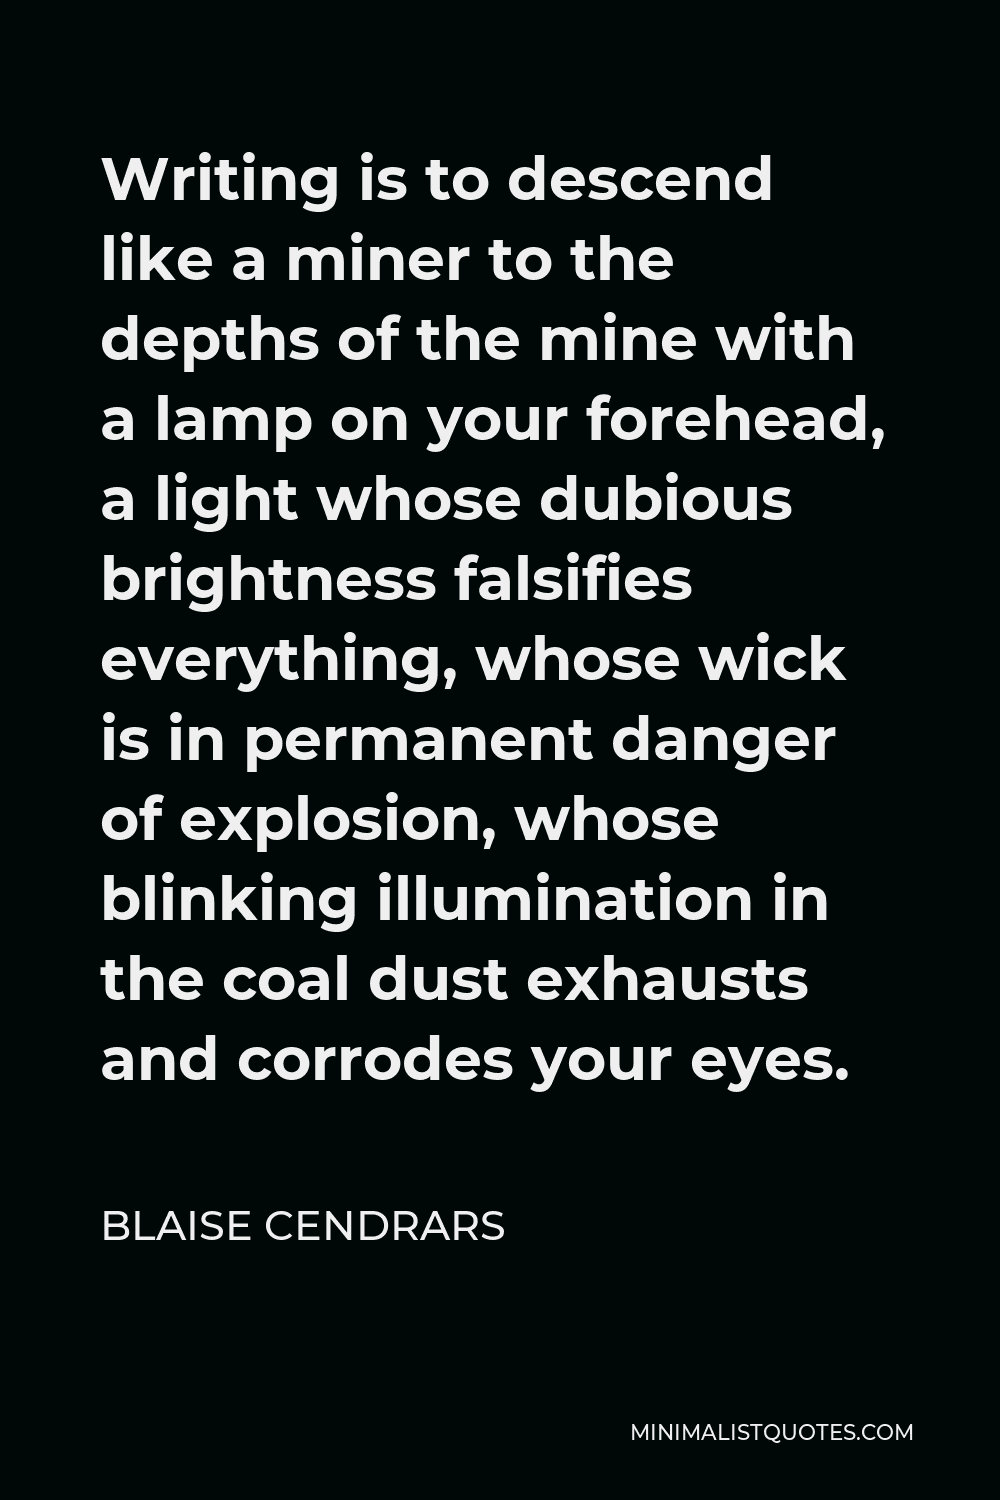 Blaise Cendrars Quote - Writing is to descend like a miner to the depths of the mine with a lamp on your forehead, a light whose dubious brightness falsifies everything, whose wick is in permanent danger of explosion, whose blinking illumination in the coal dust exhausts and corrodes your eyes.